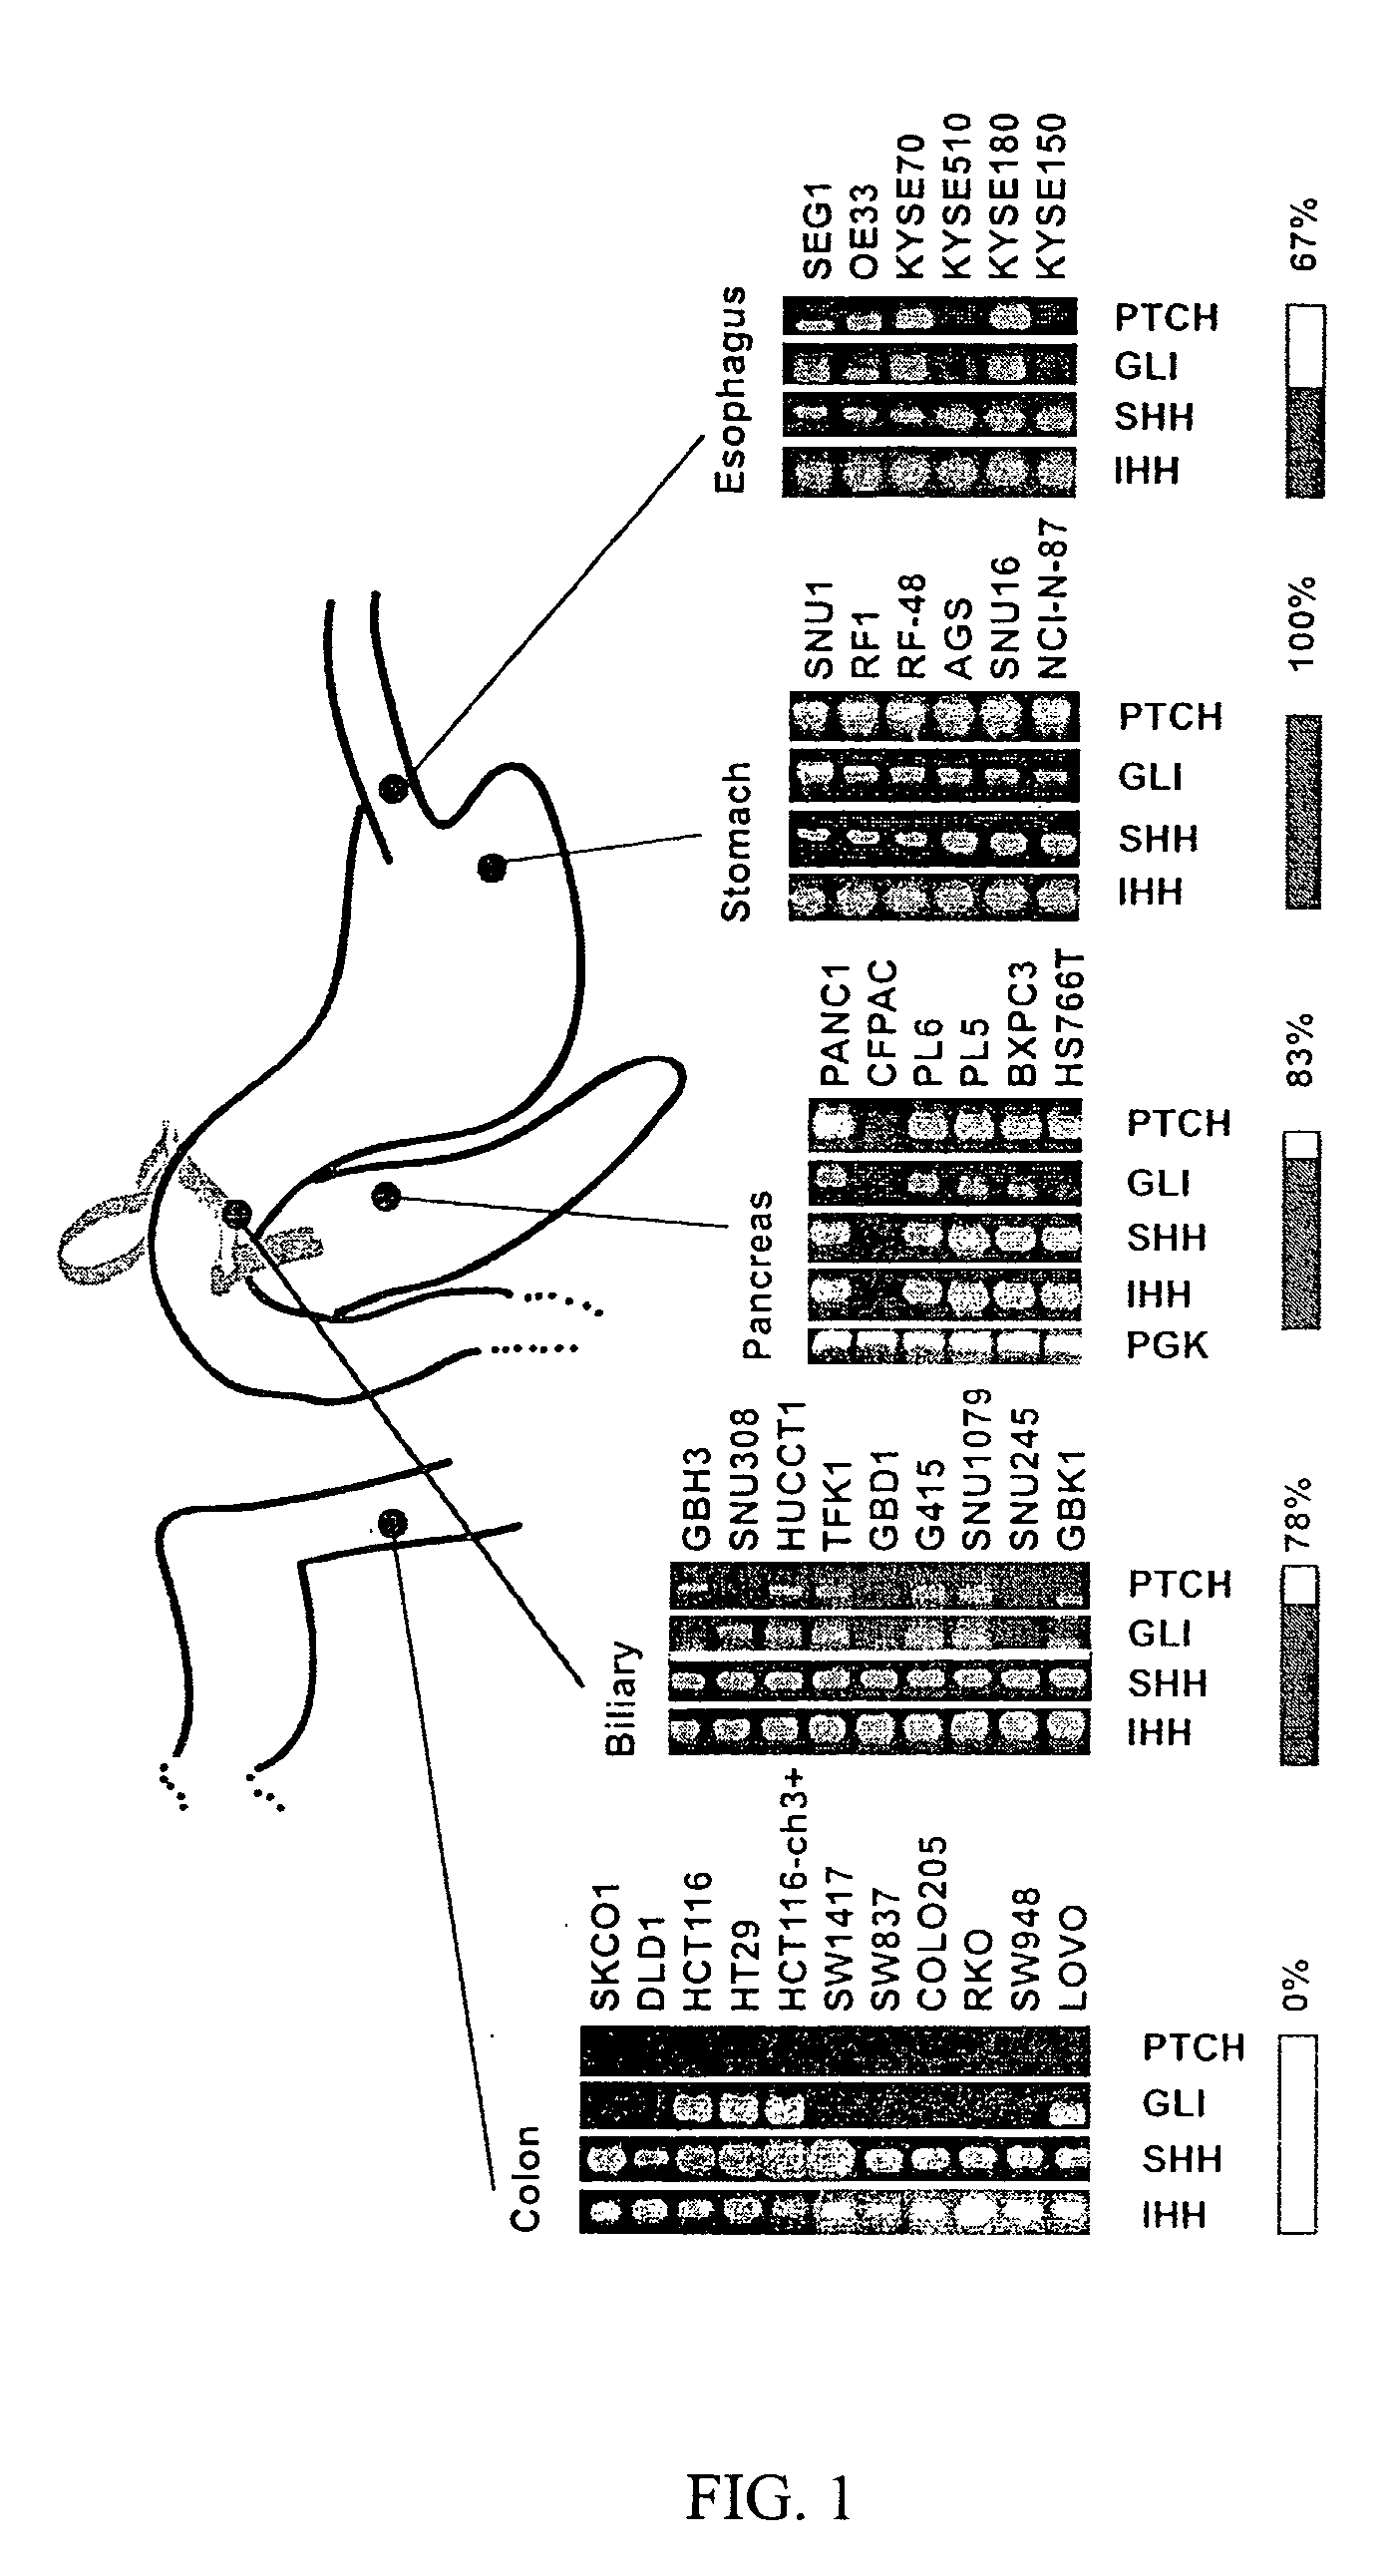 Elevated Hedgehog Pathway Activity In Digestive System Tumors, And Methods Of Treating Digestive Sytem Tumors Having Elevated Hedgehog Pathway Activity